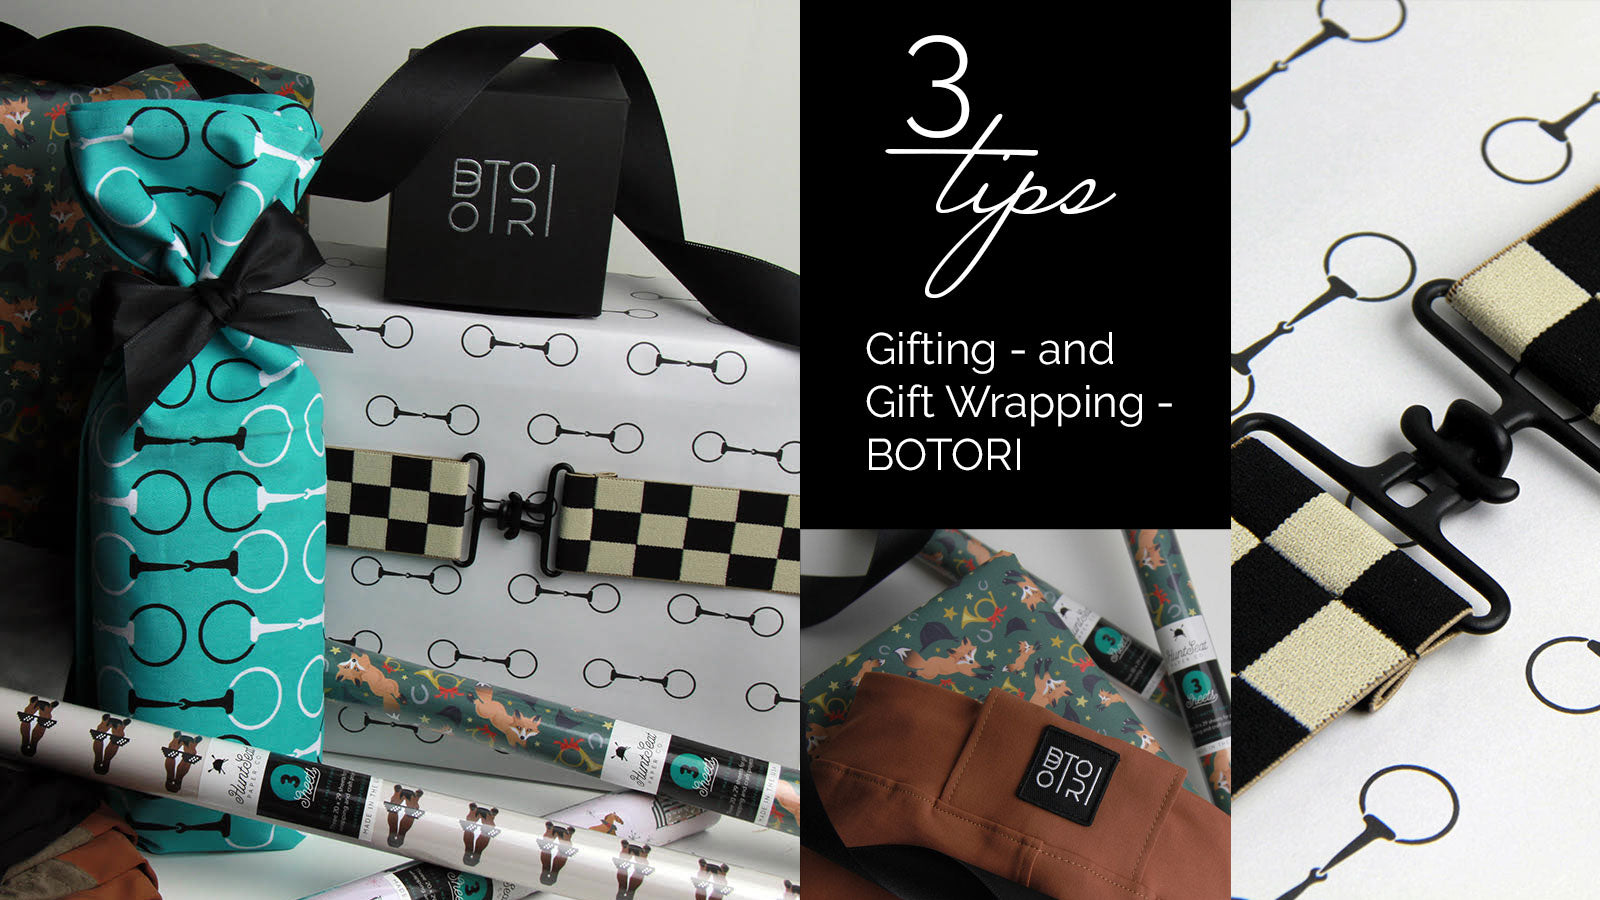 3 Tips for Gifting - and Gift Wrapping - BOTORI